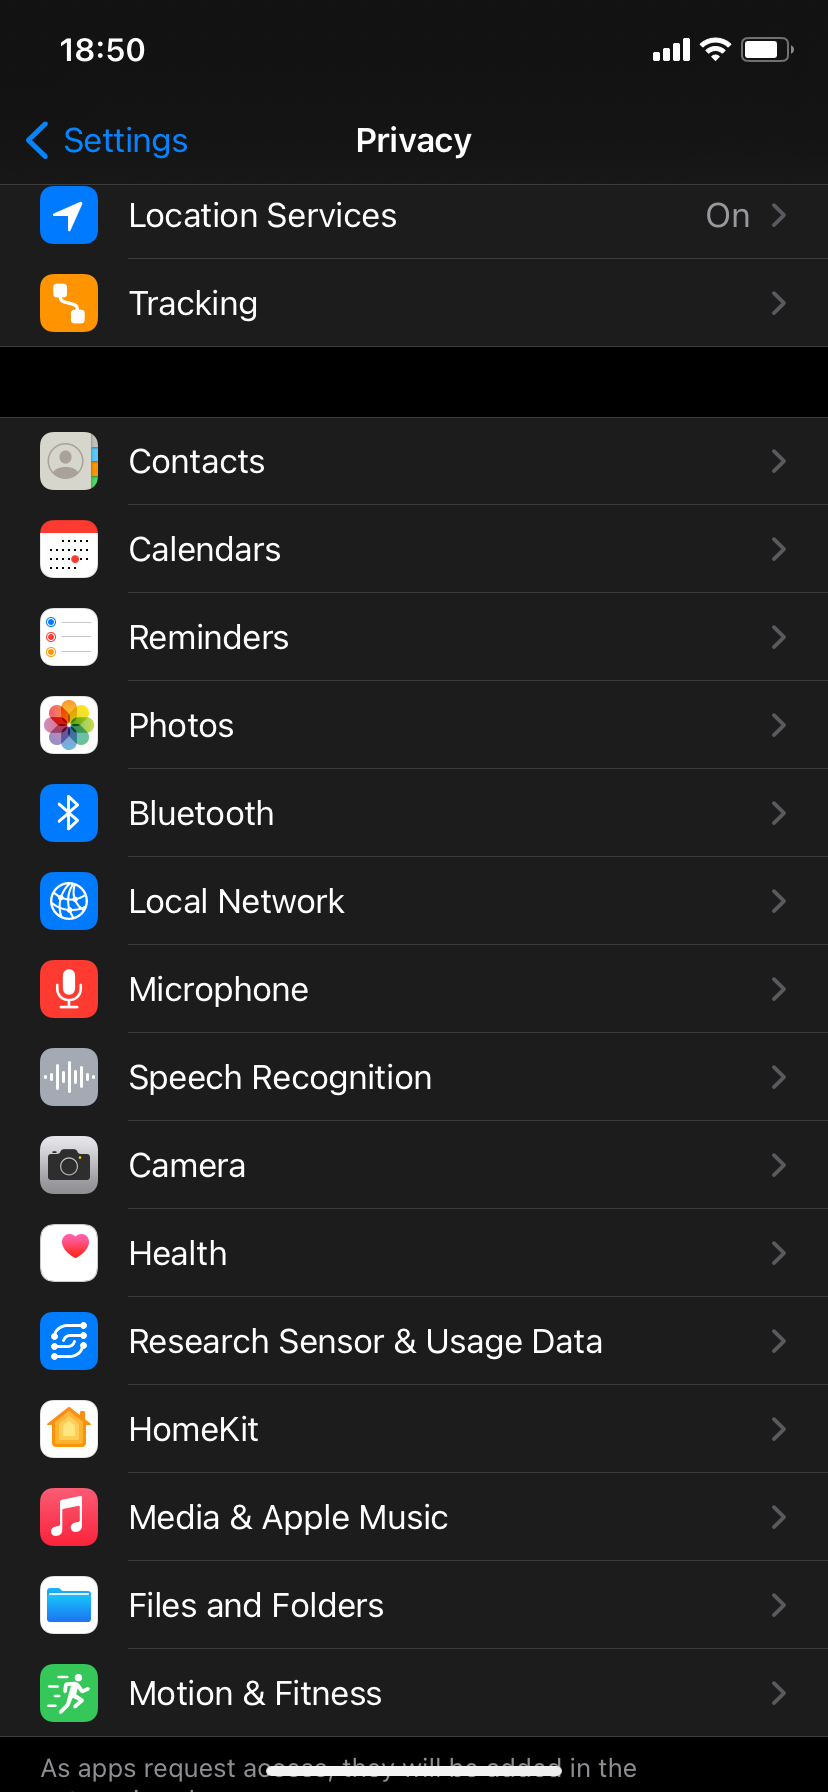 how to change privacy settings on iPhone